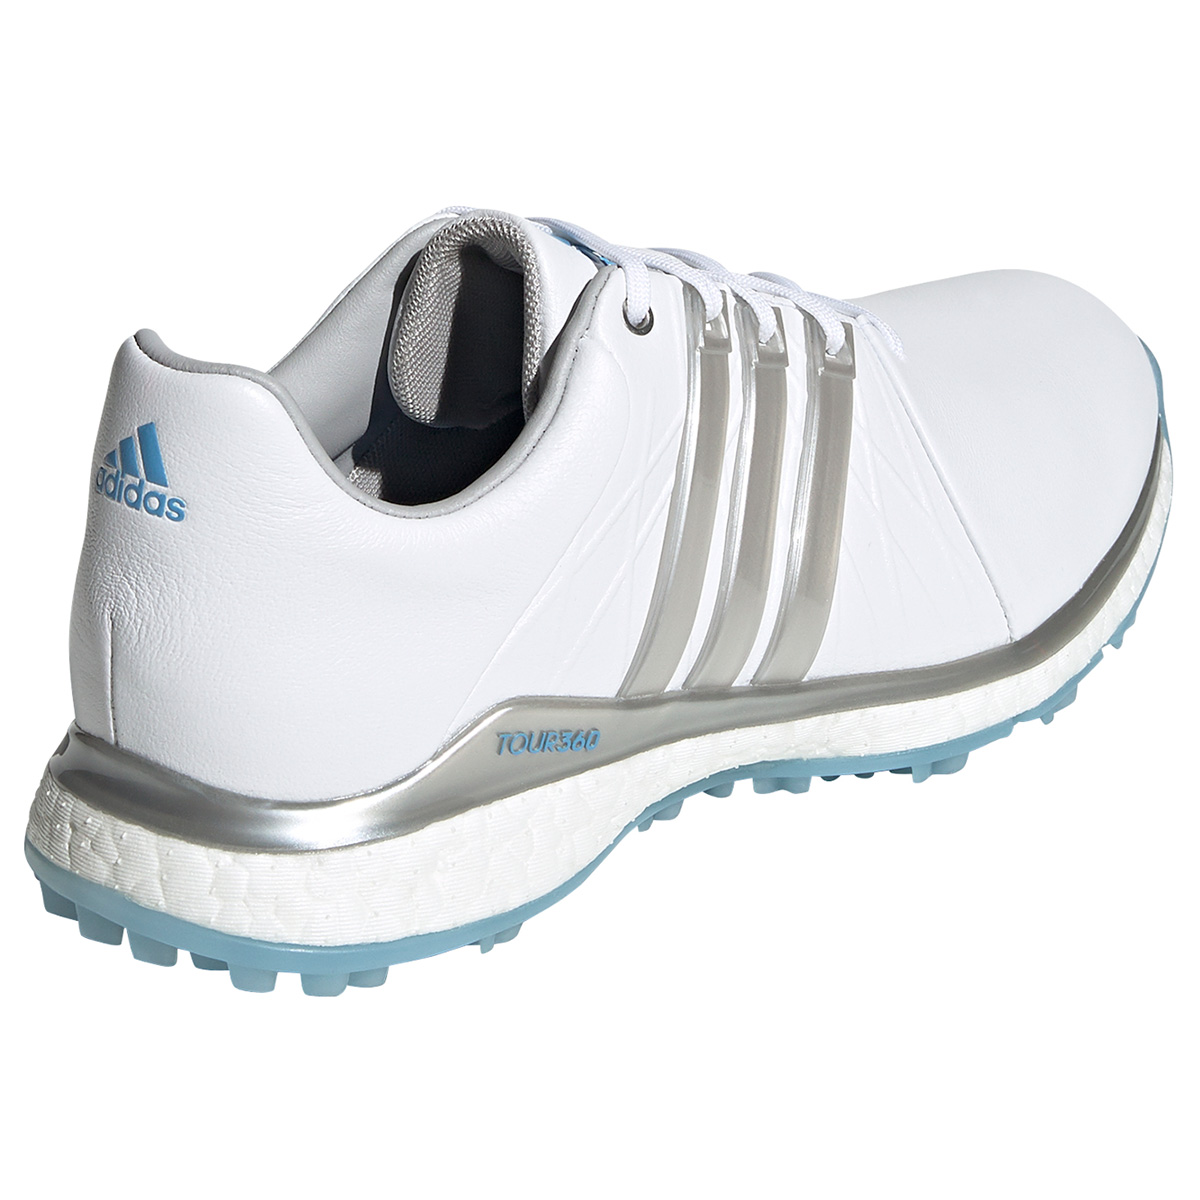 Adidas Tour 360 Golf Shoes Purchase Guide And Buying Tips - PXG Golf ...